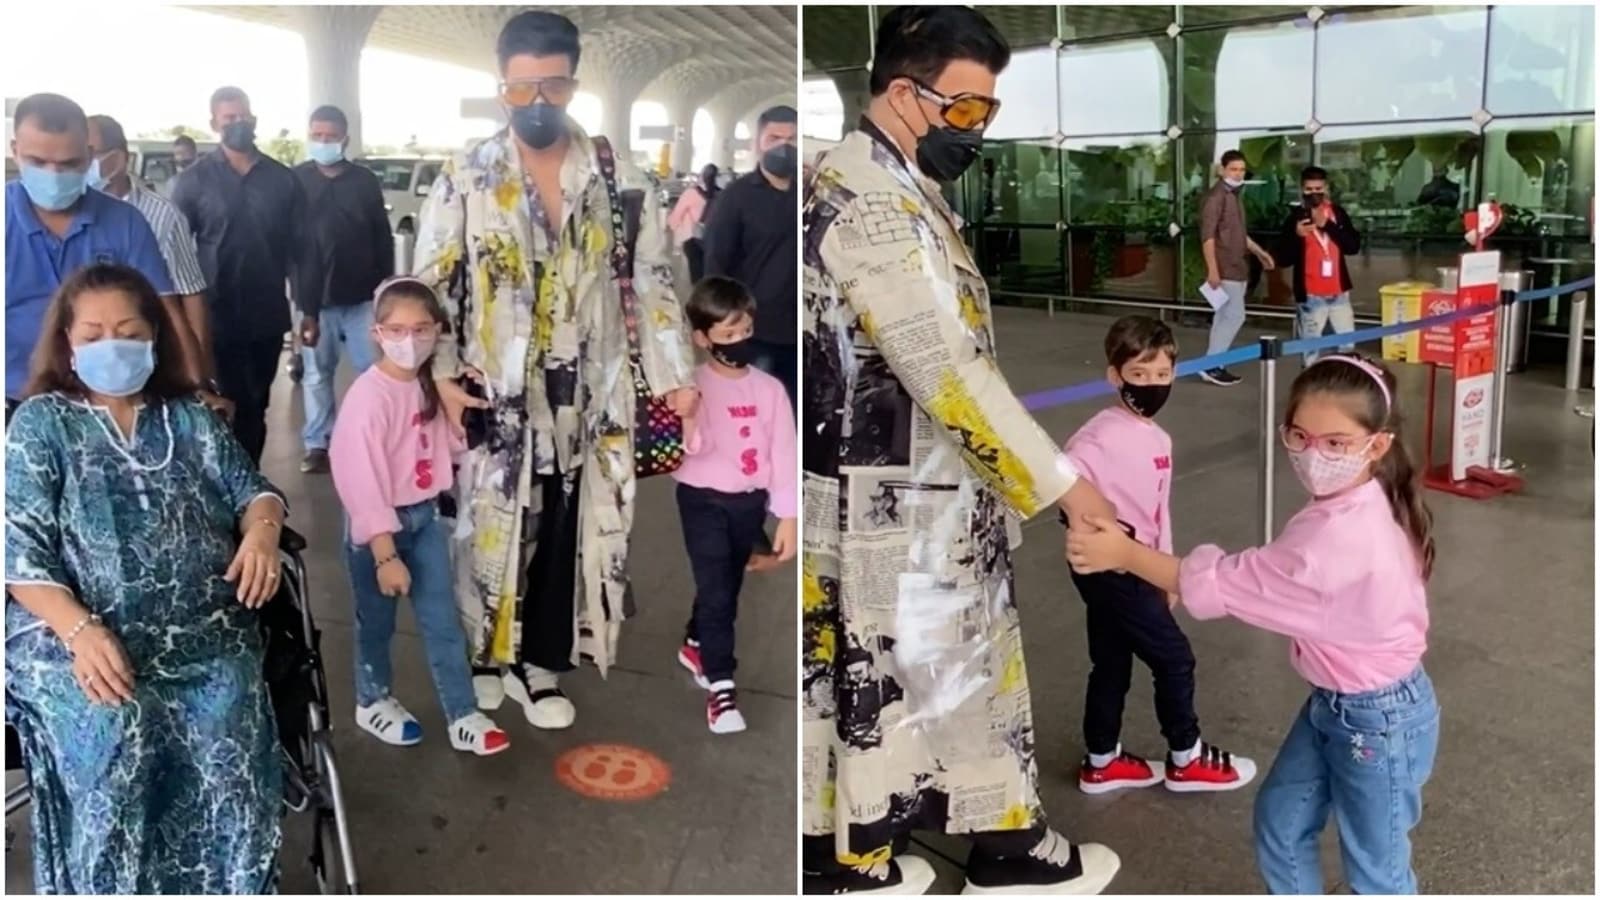 Karan Johar leaves for vacation with kids Roohi and Yash, and mom Hiroo Johar, fans call them a ‘cute family’. Watch